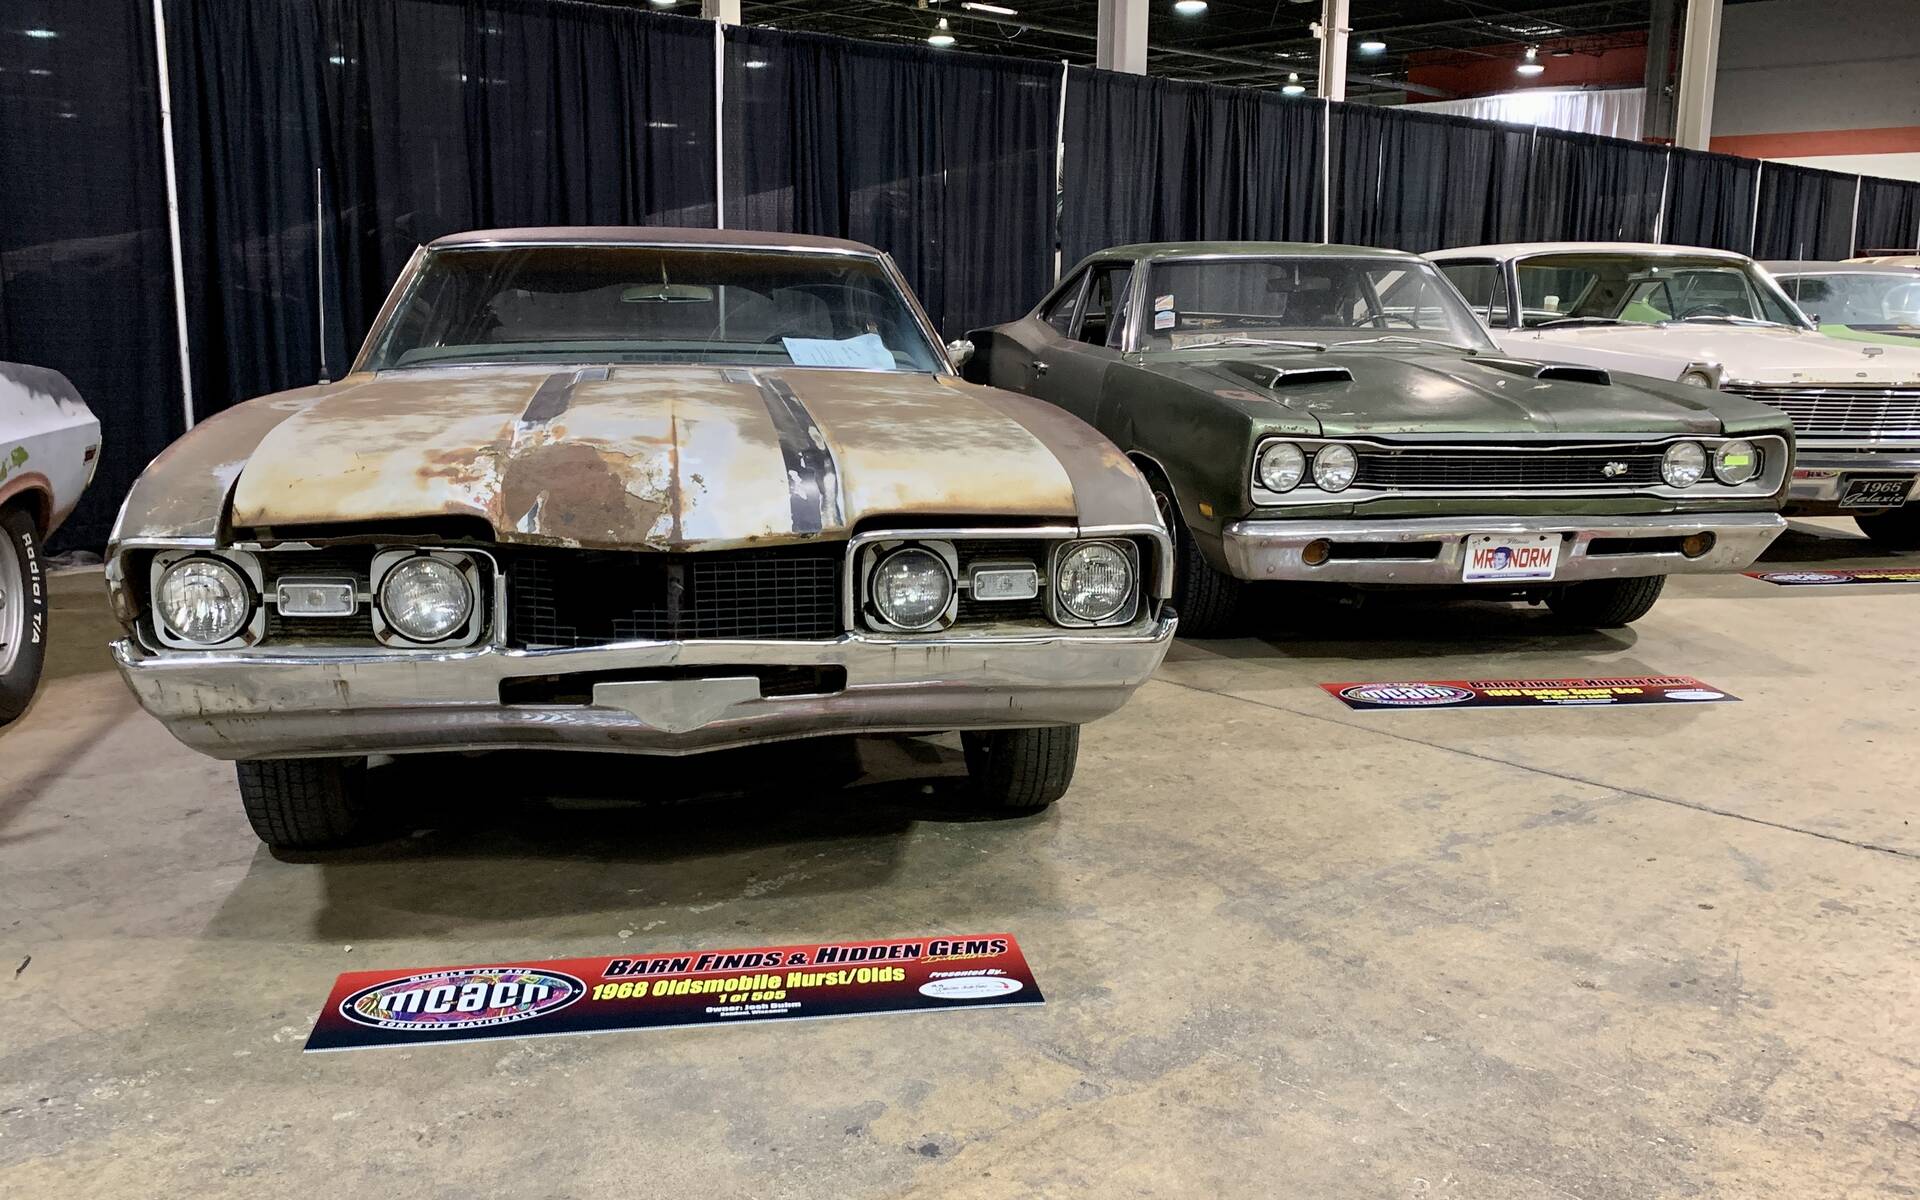 <p><strong>1968 Oldsmobile Hurst/Olds and 1969 Dodge Super Bee</strong></p>